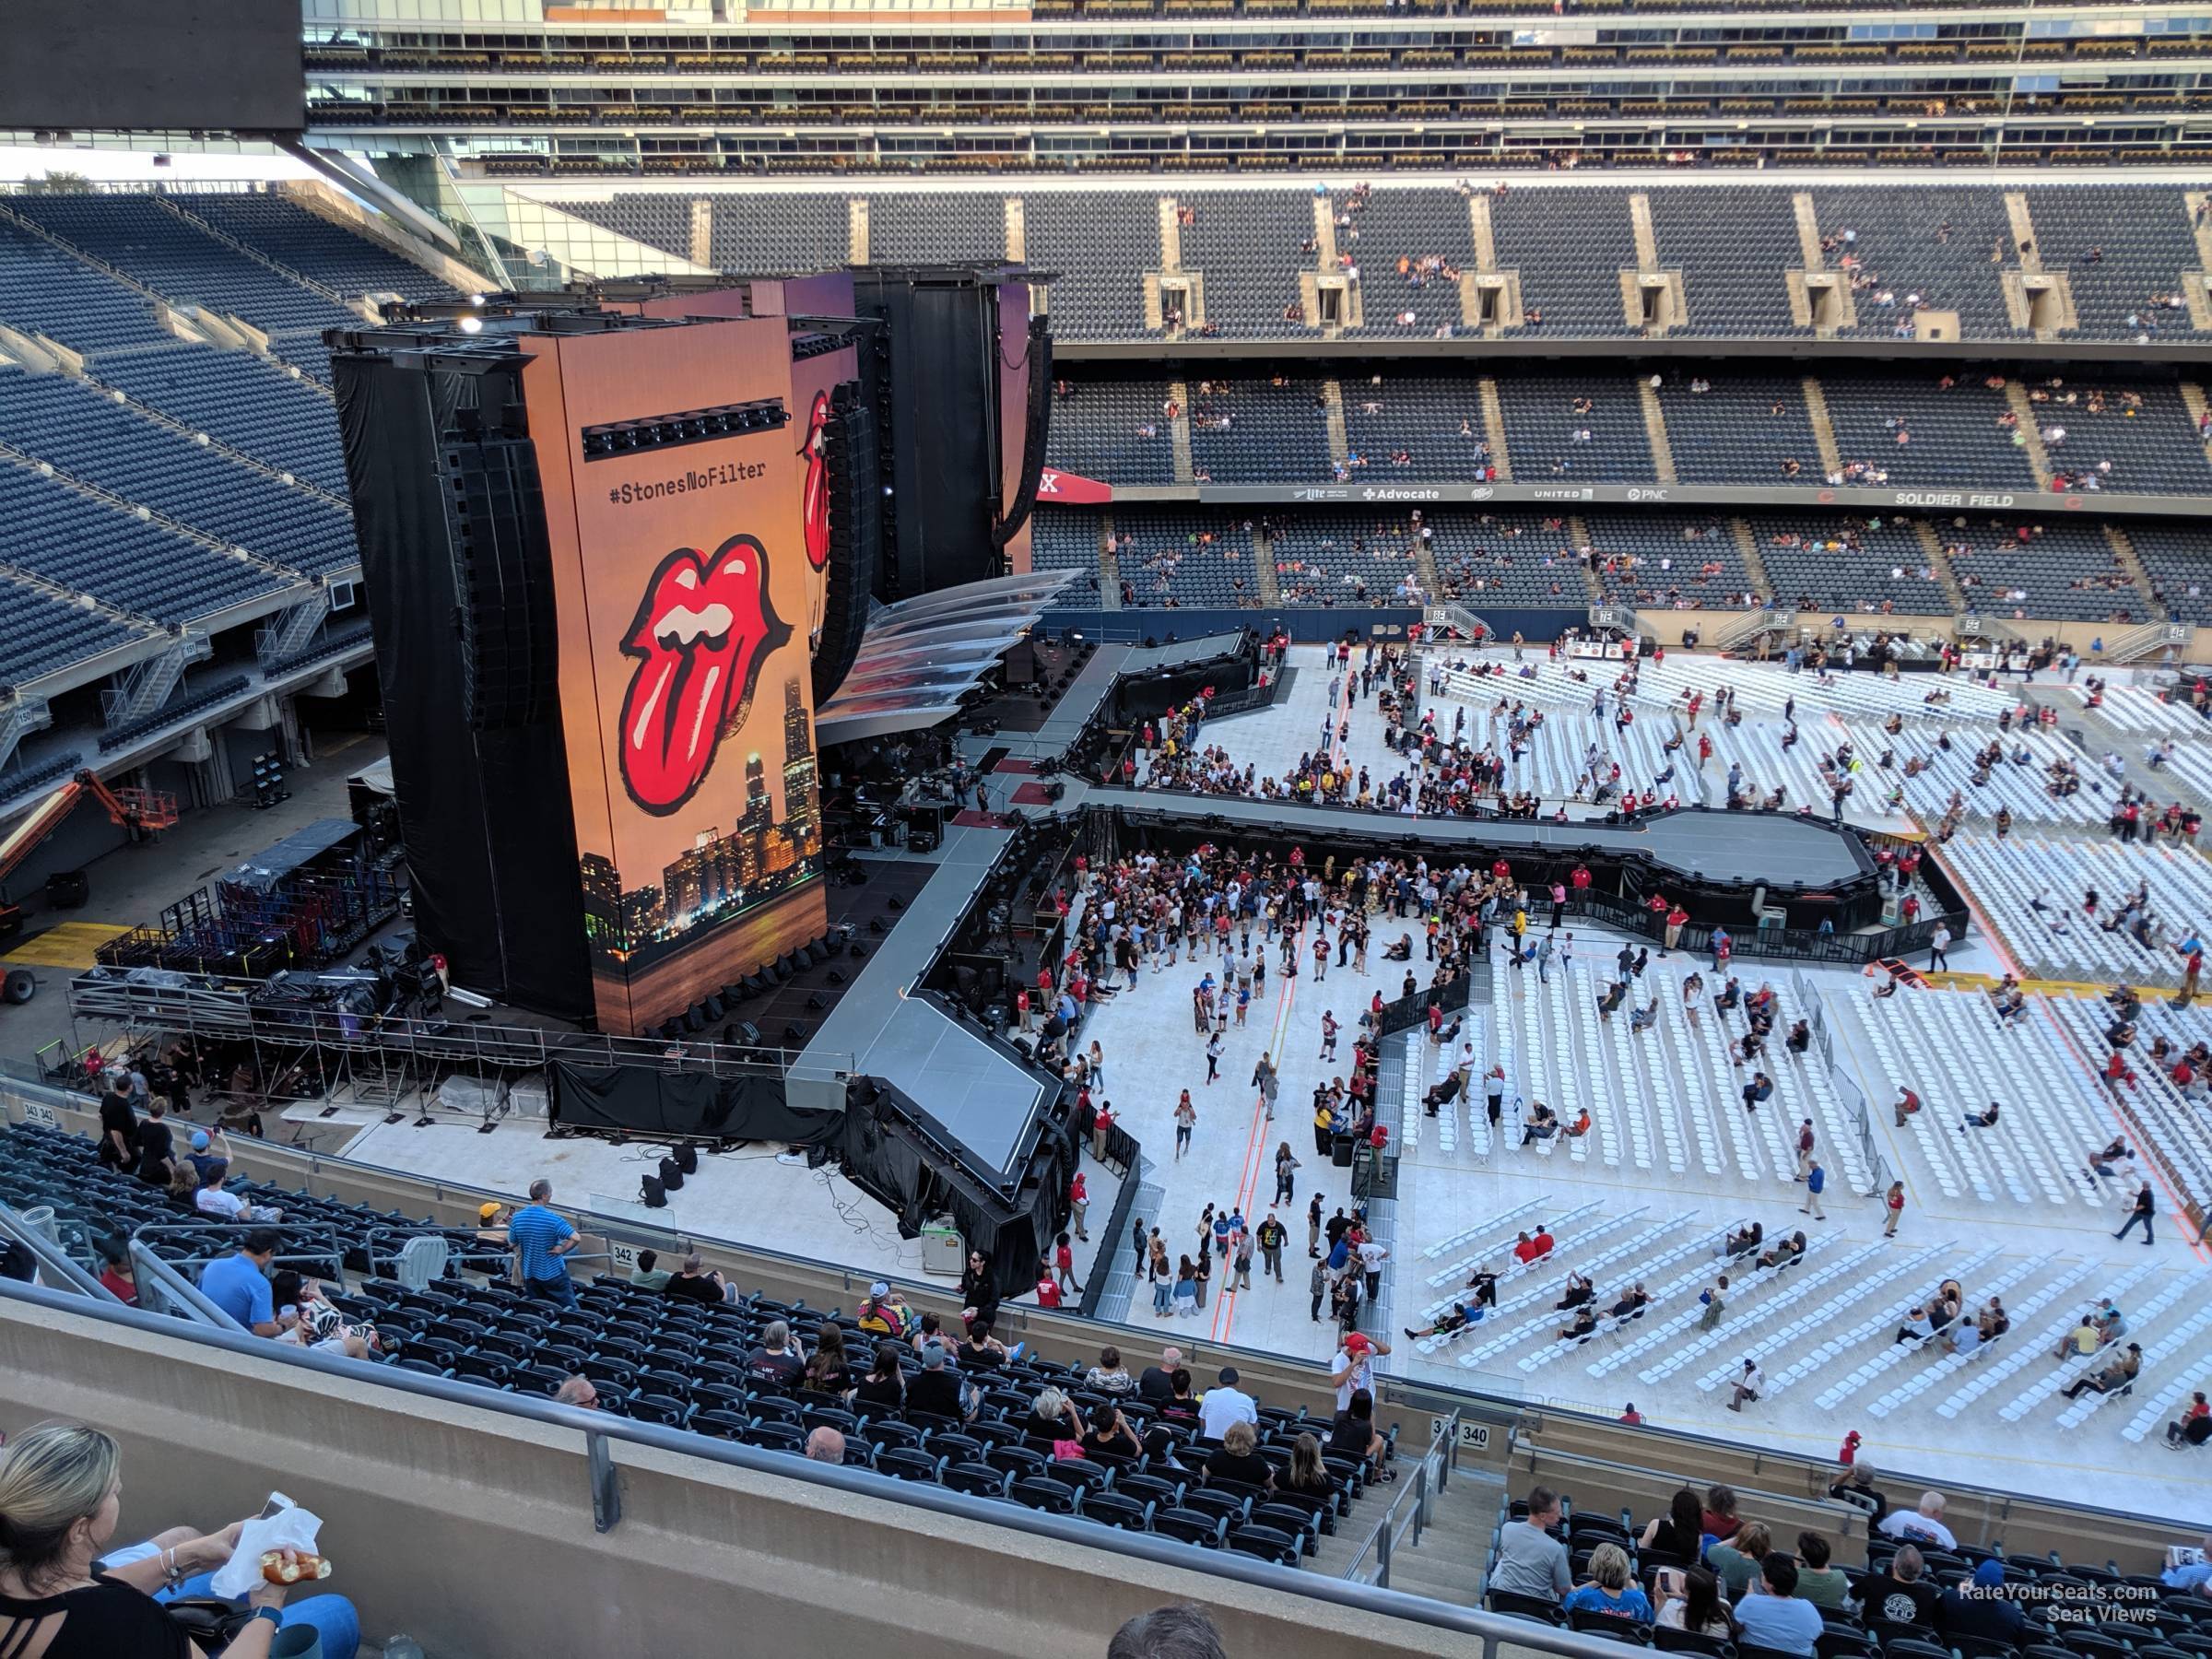 section 440, row 3 seat view  for concert - soldier field